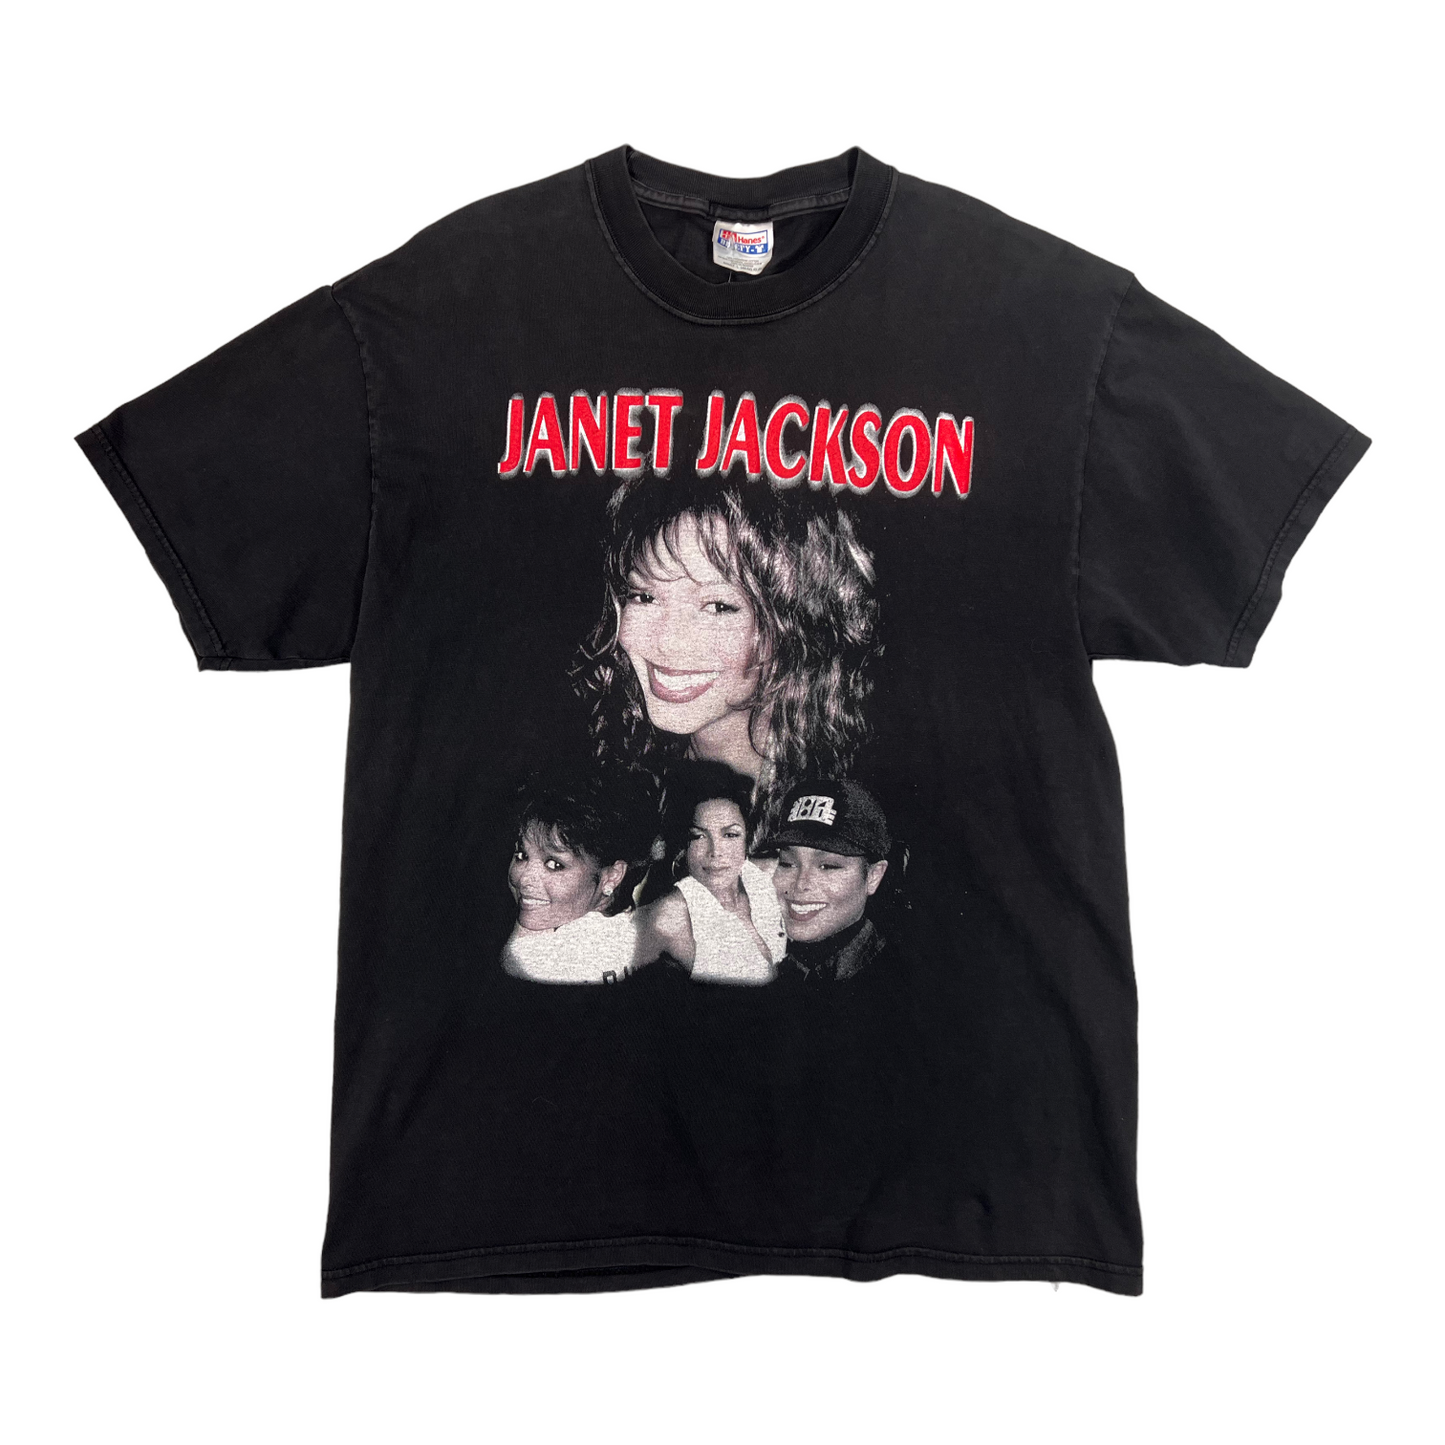 2001 JANET JACKSON  “All for you” vintage Rap tee